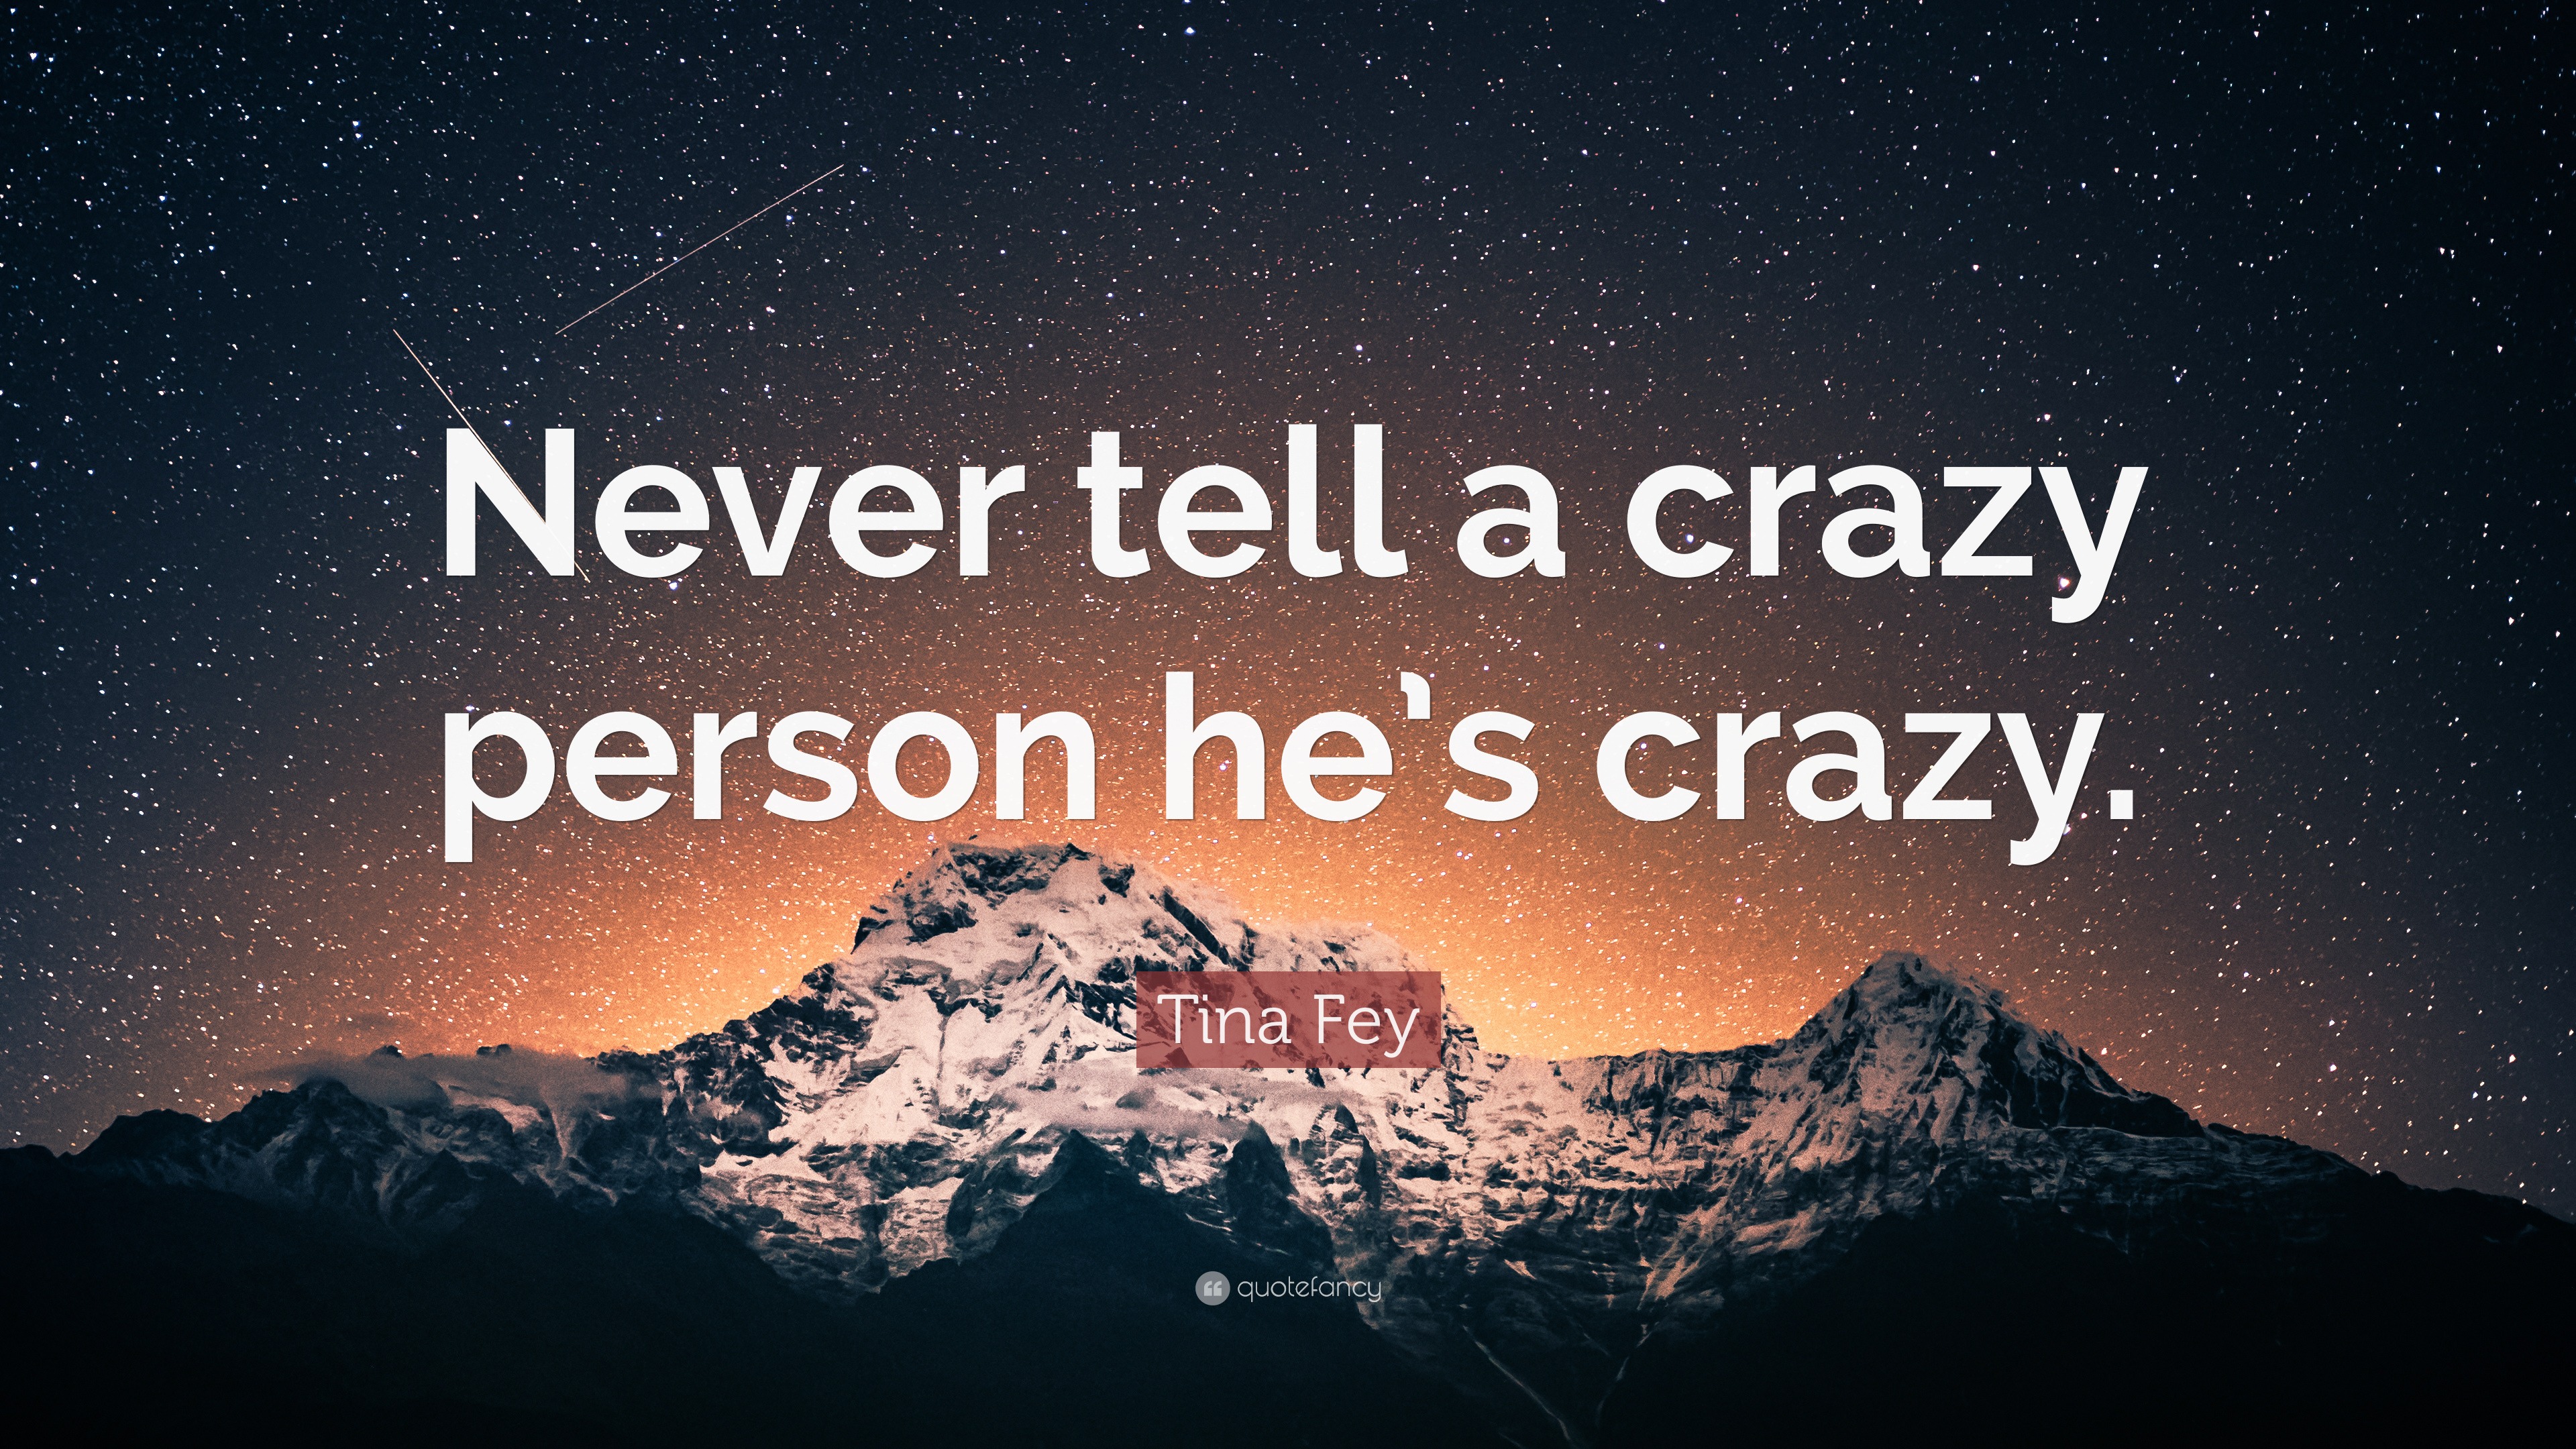 Tina Fey Quote: "Never tell a crazy person he's crazy ...